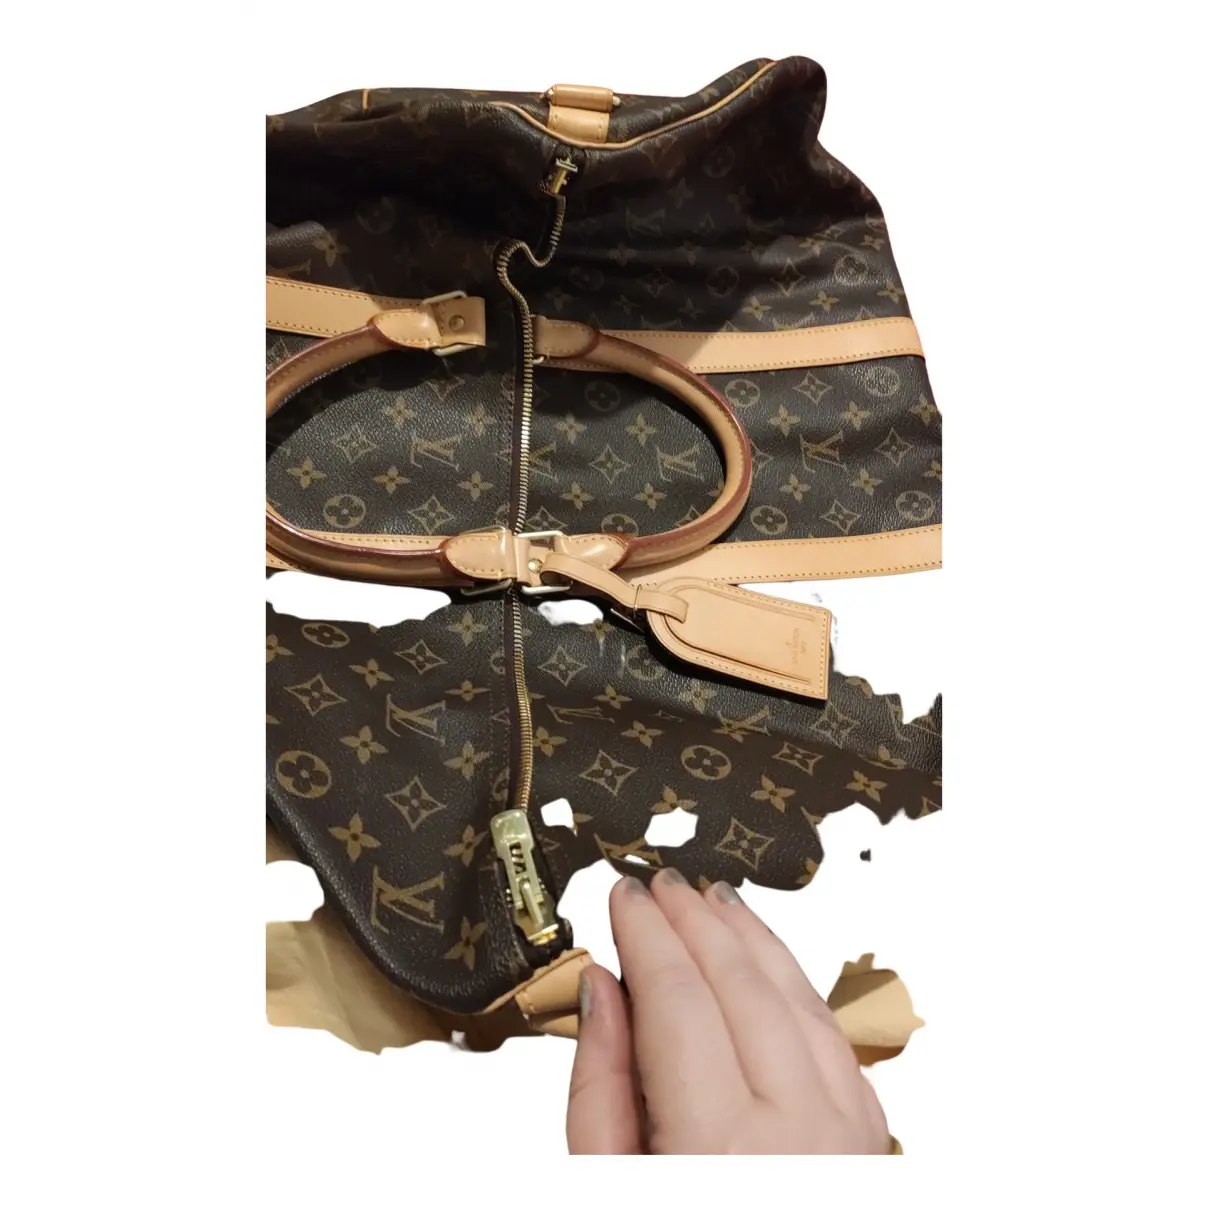 Buy Louis Vuitton Keepall leather travel bag online